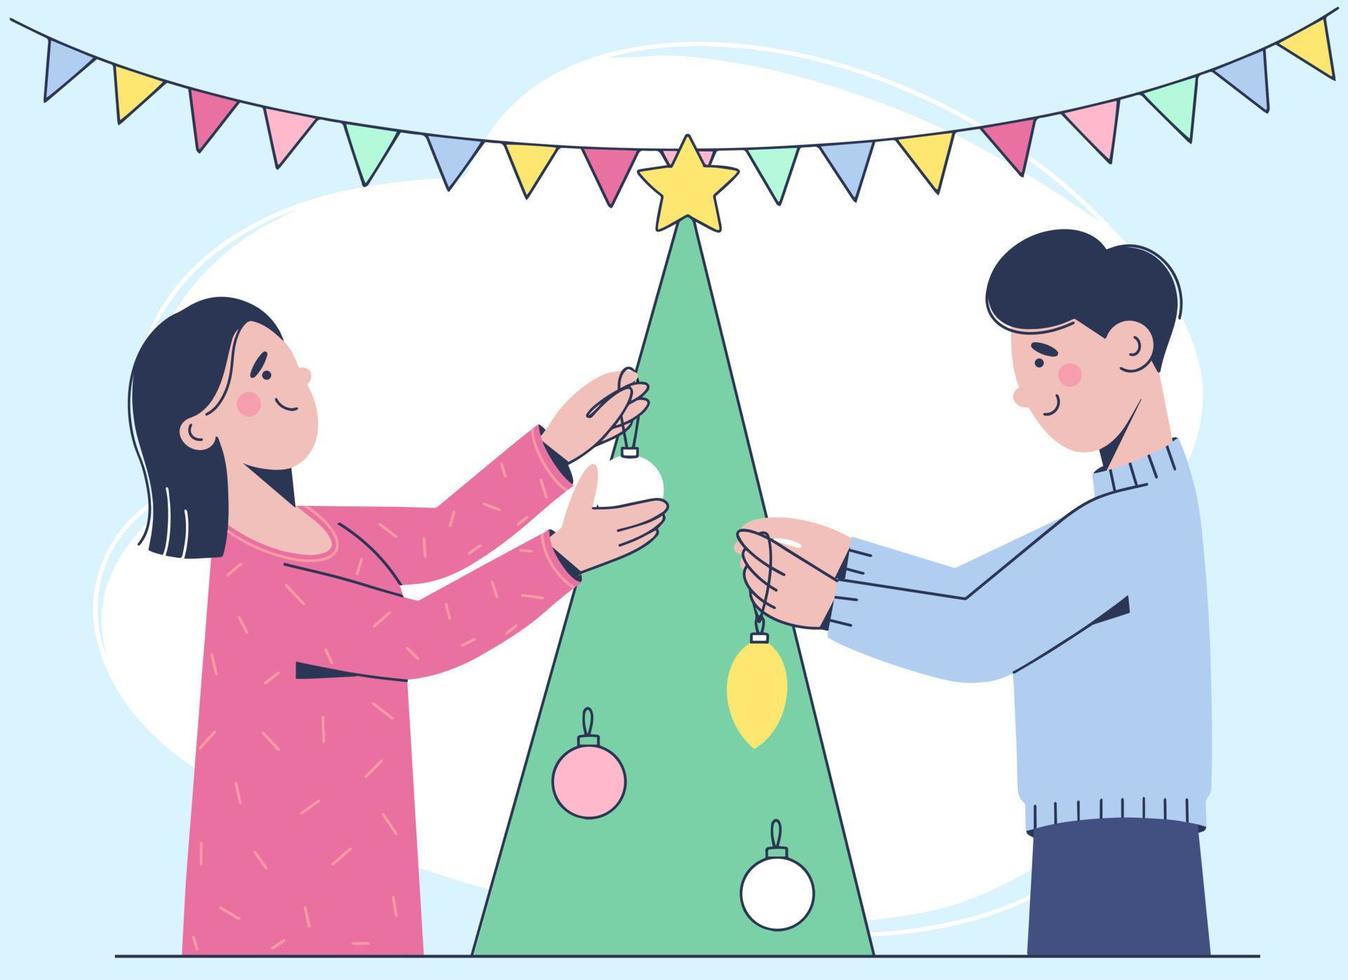 Young married couple is decorating a Christmas tree. Flat illustration vector